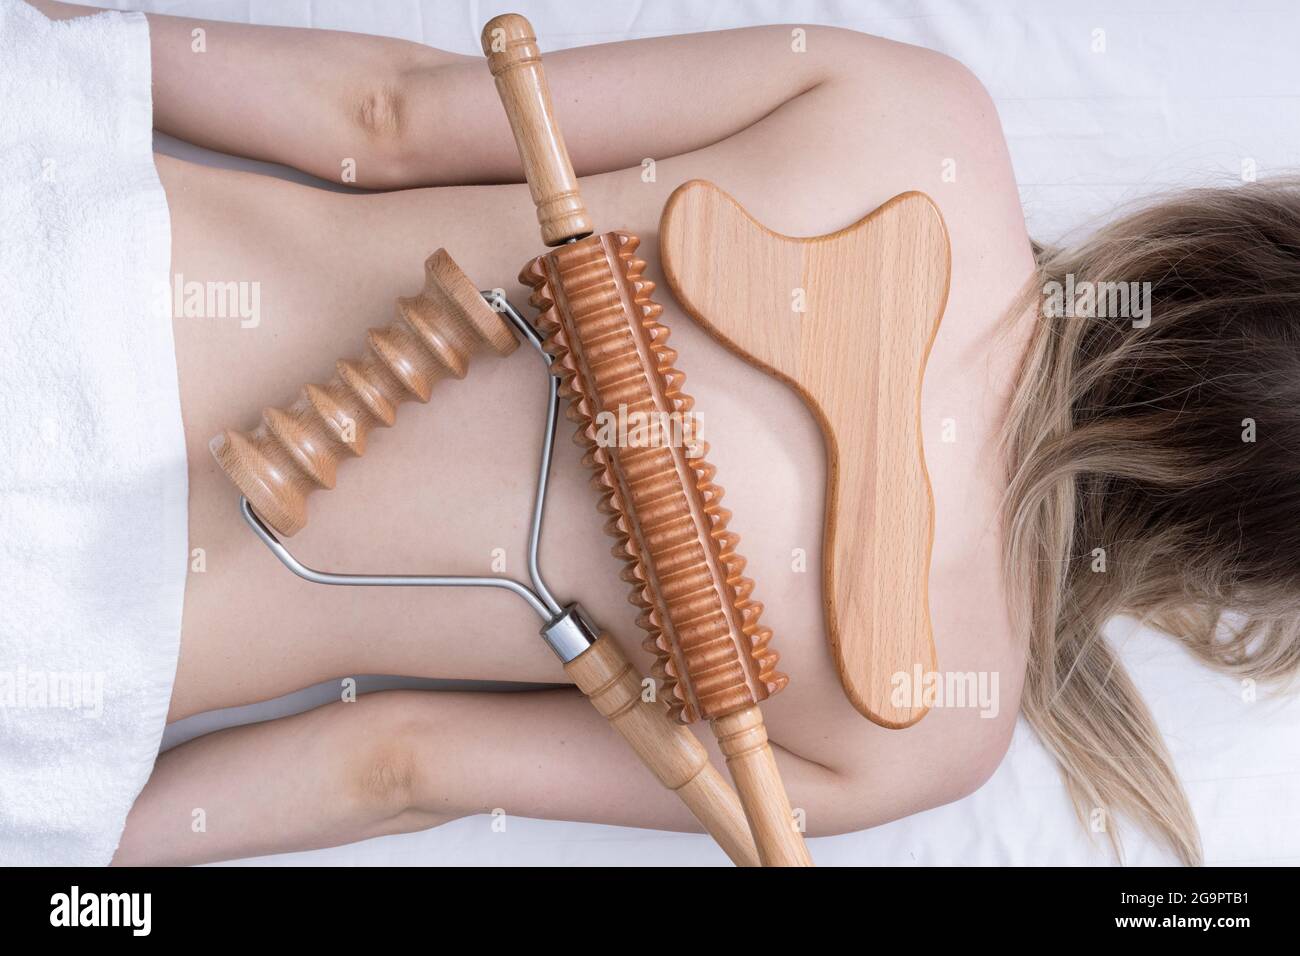 Madero therapy, anti-cellulite relaxing massage - wooden massage tools roller  spiked, rolling pin, plate lying on a woman's back, top view, close-up  Stock Photo - Alamy